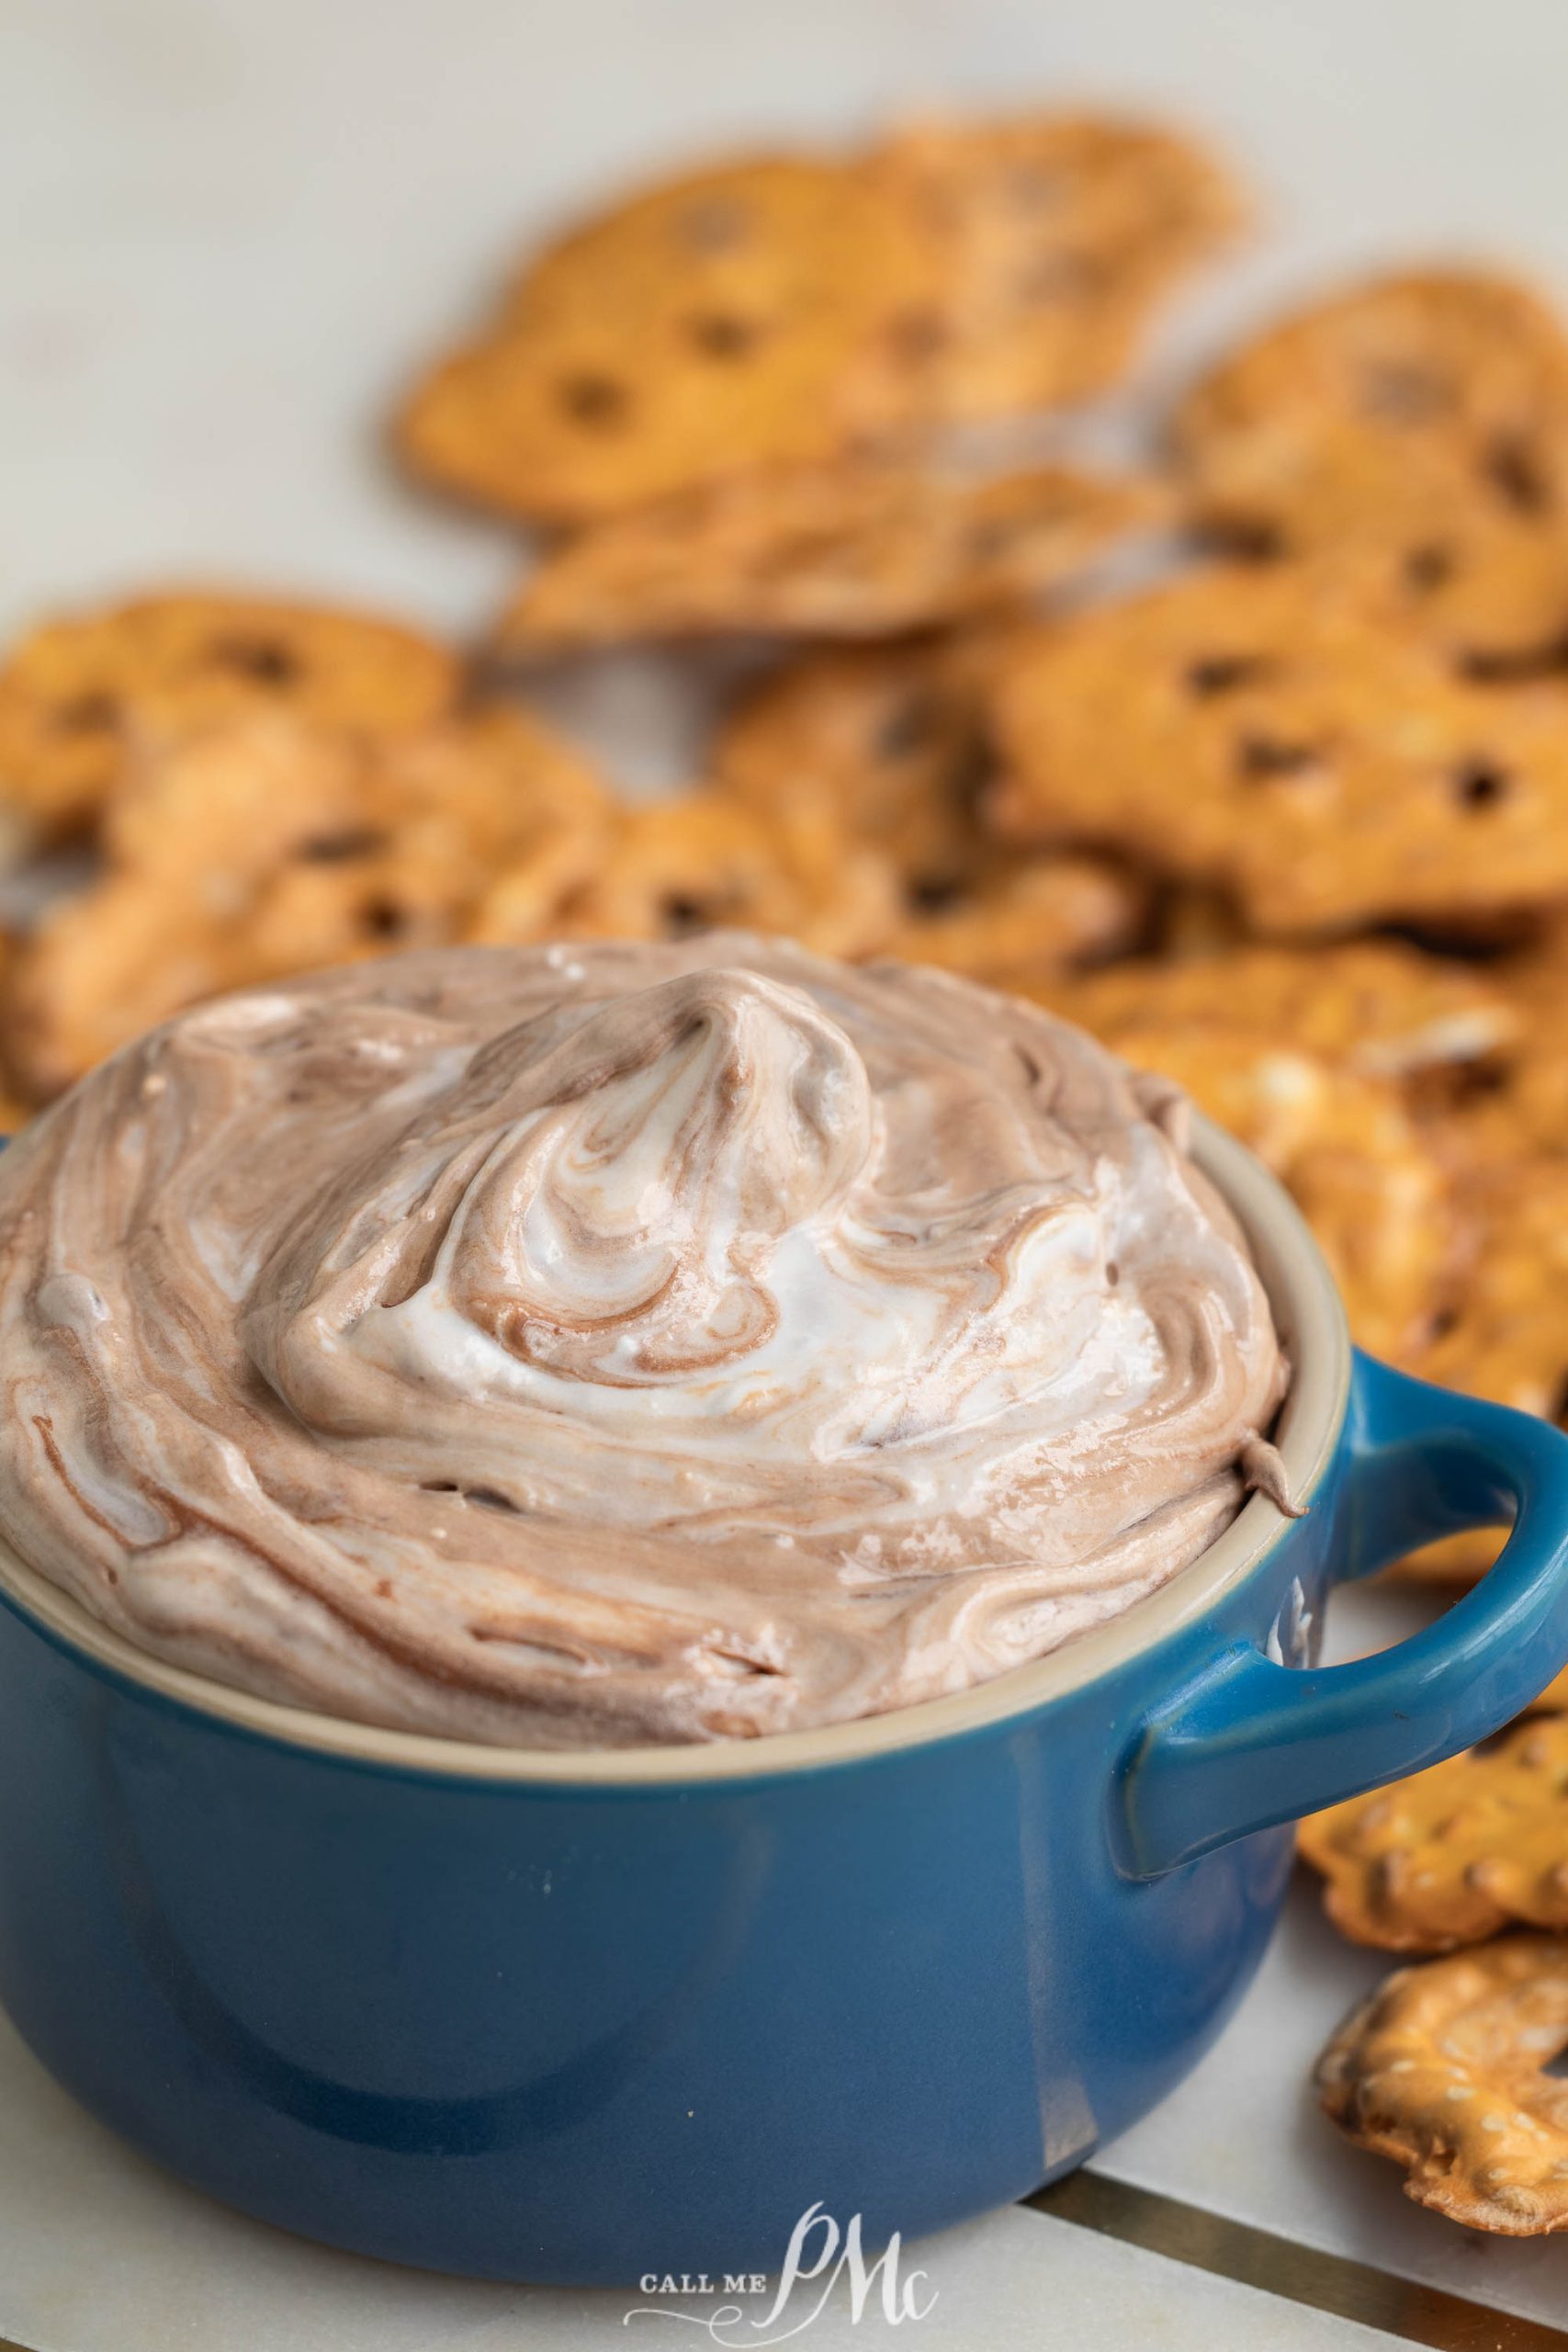 Chocolate pretzel dip in a blue bowl with crackers.